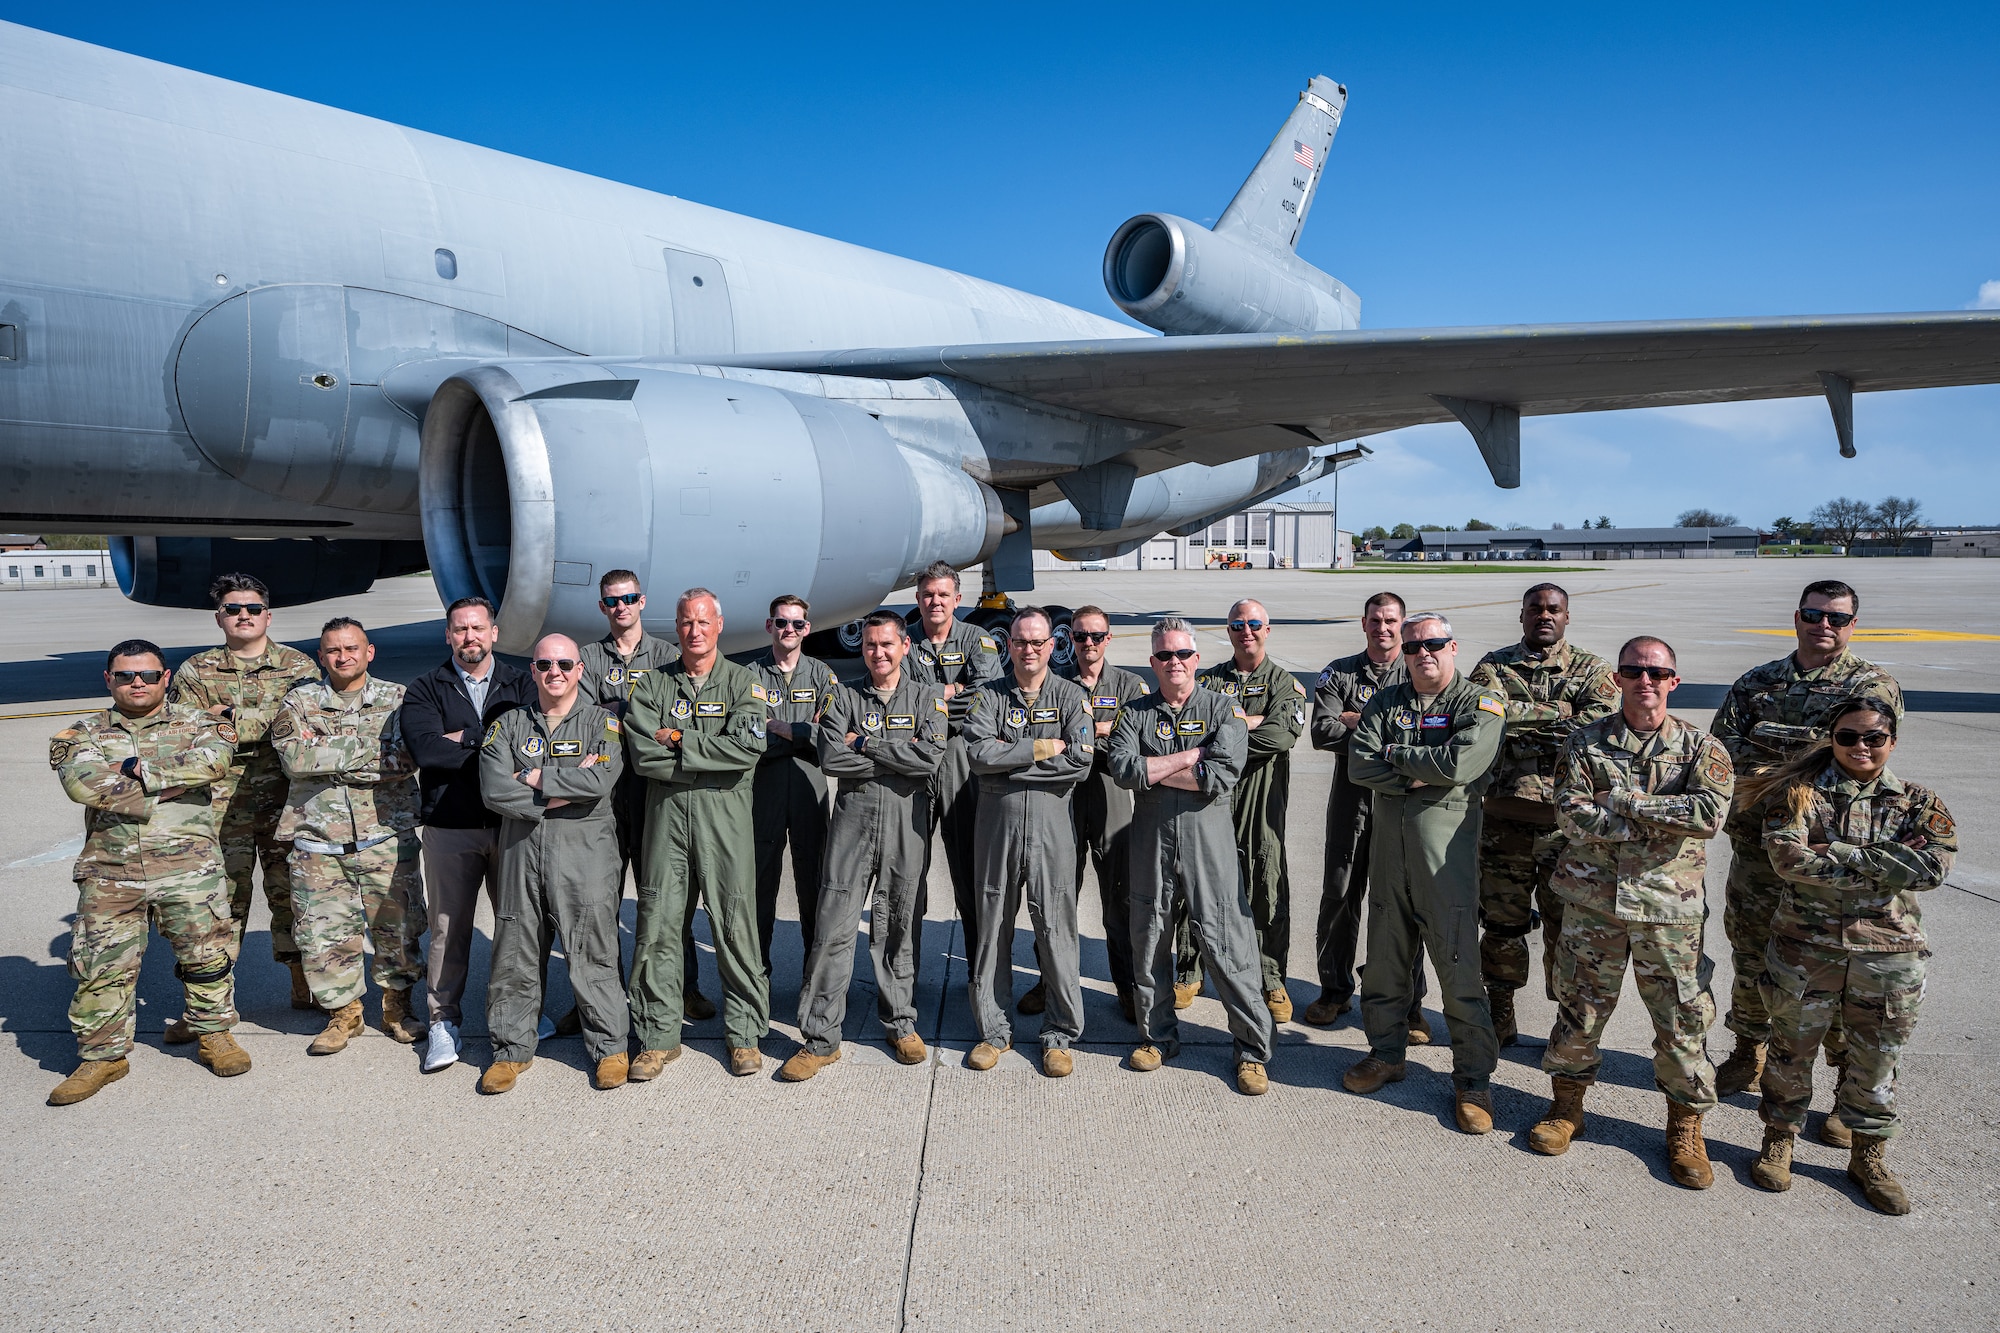 A group photo of the air crew in front of the KC-10 engine and tail